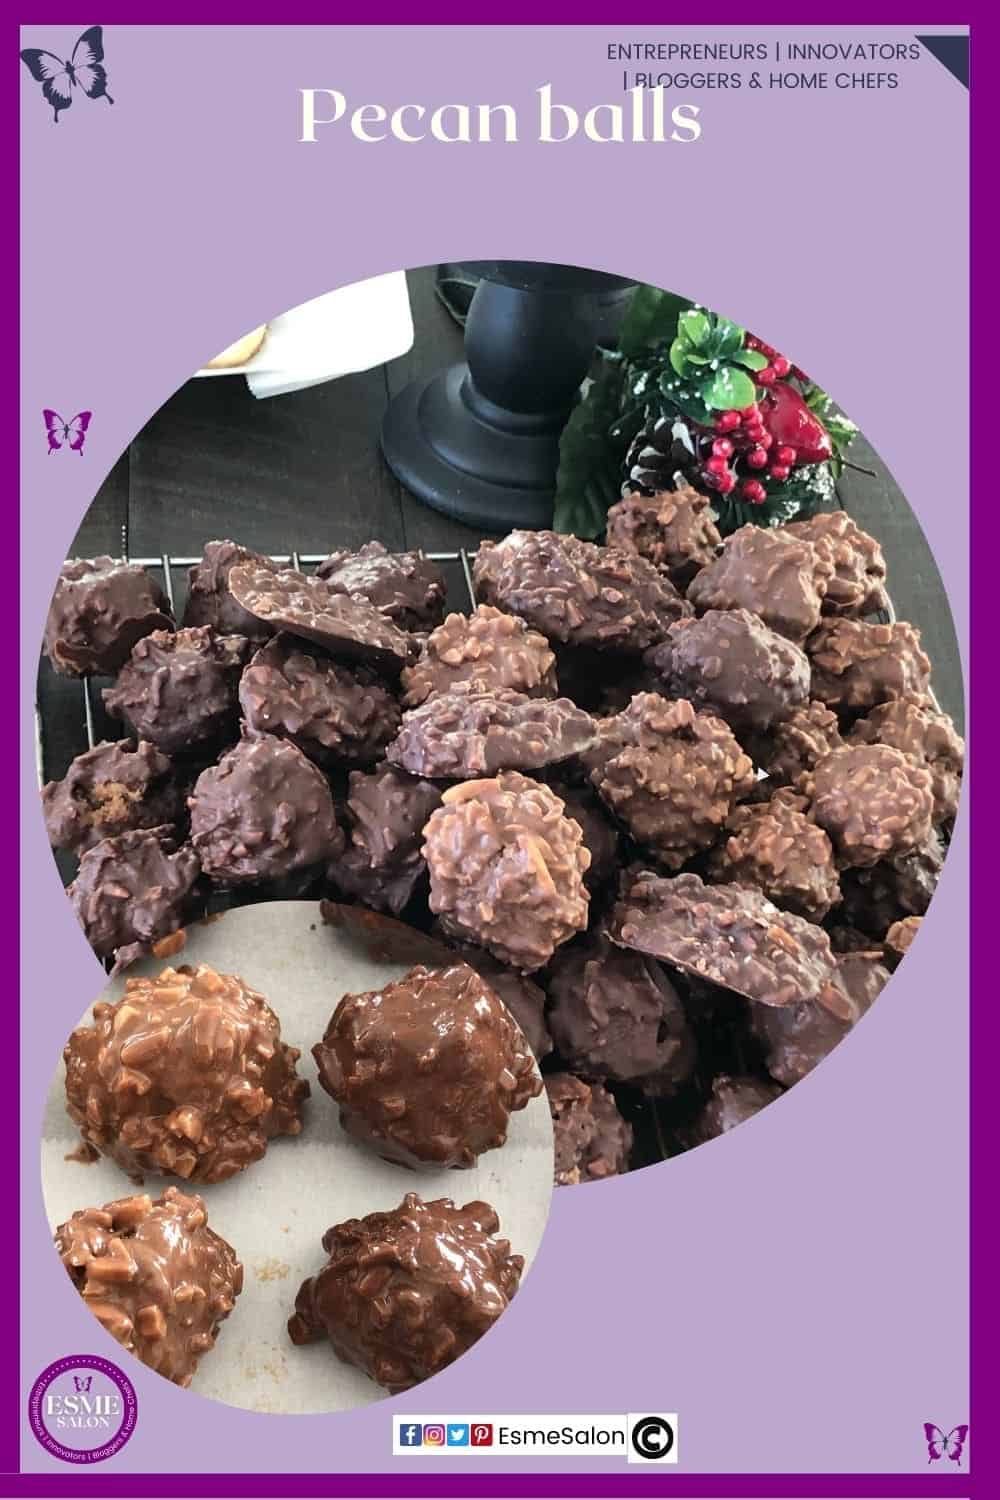 an image of round Pecan balls covered in chocolate